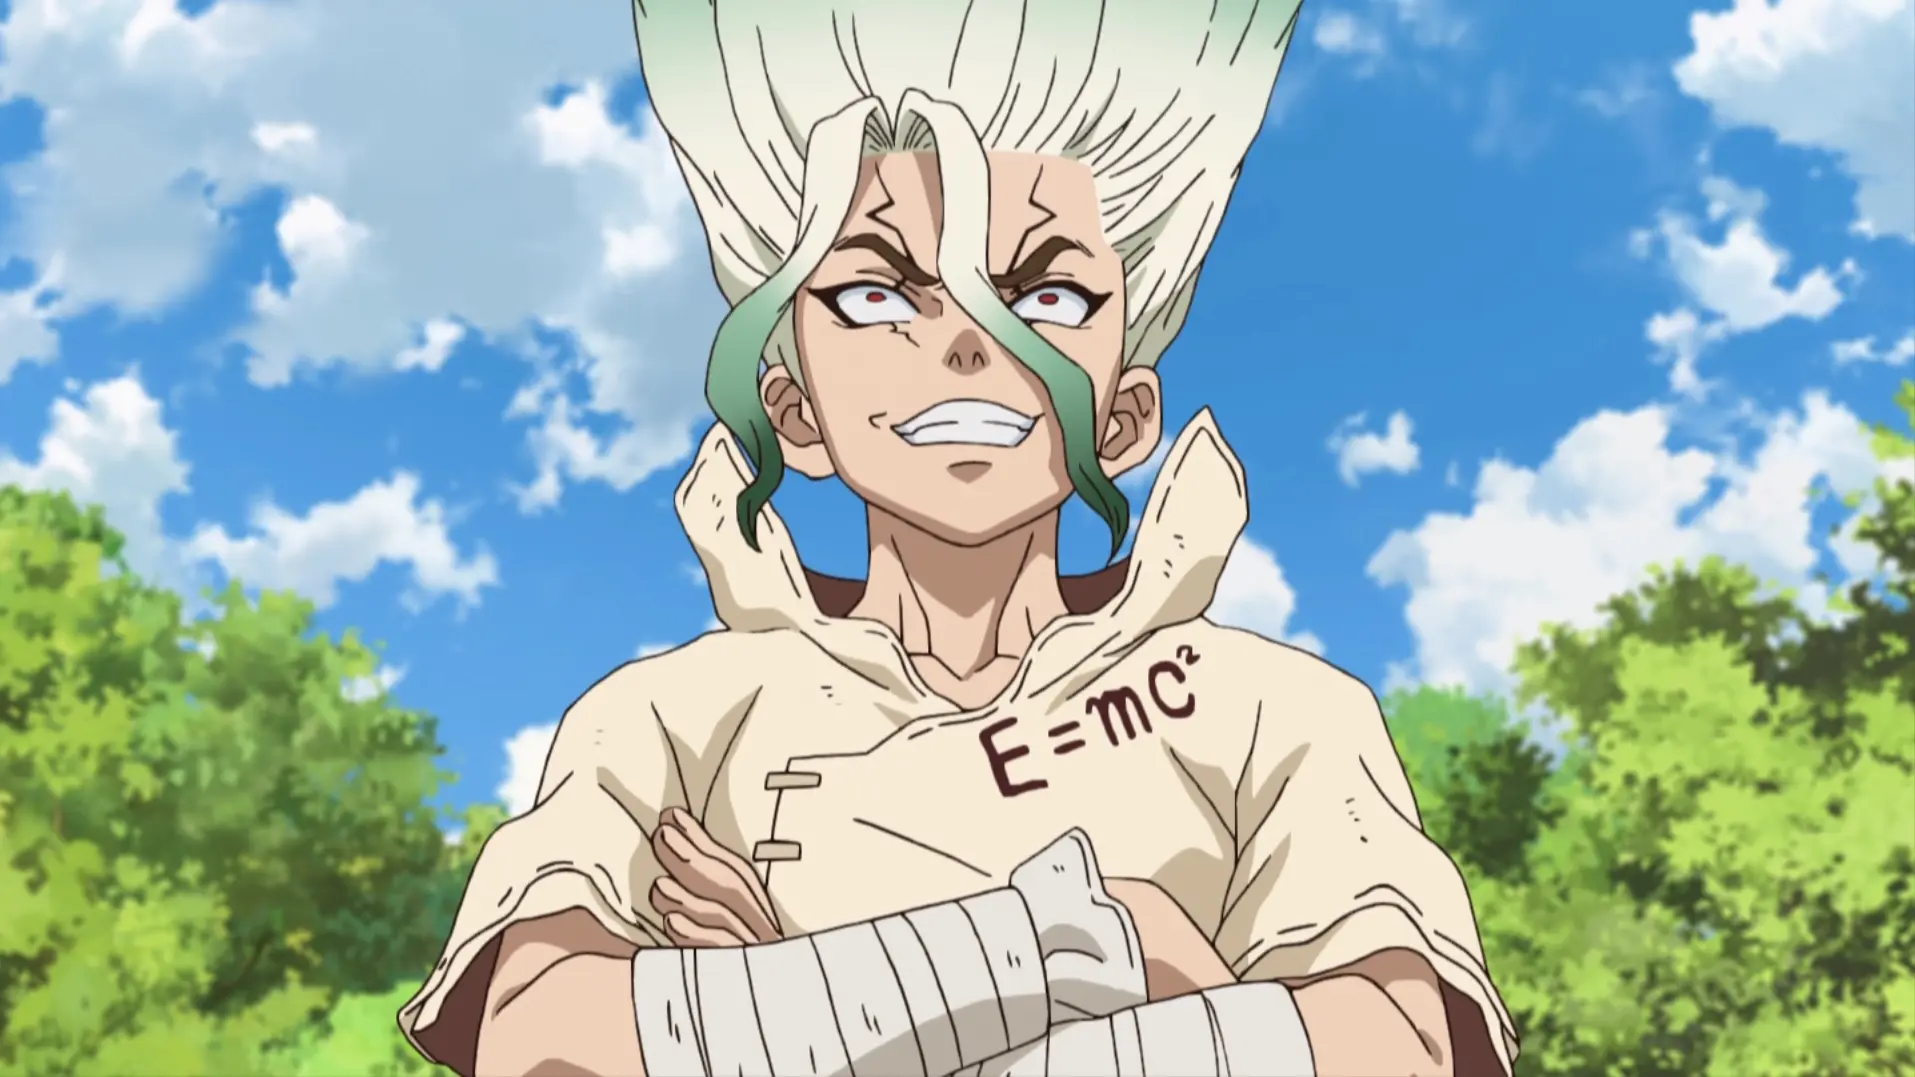 Dr. Stone Season 3 Episode 5 Release Date, Preview, Spoilers, Watch Online, and More